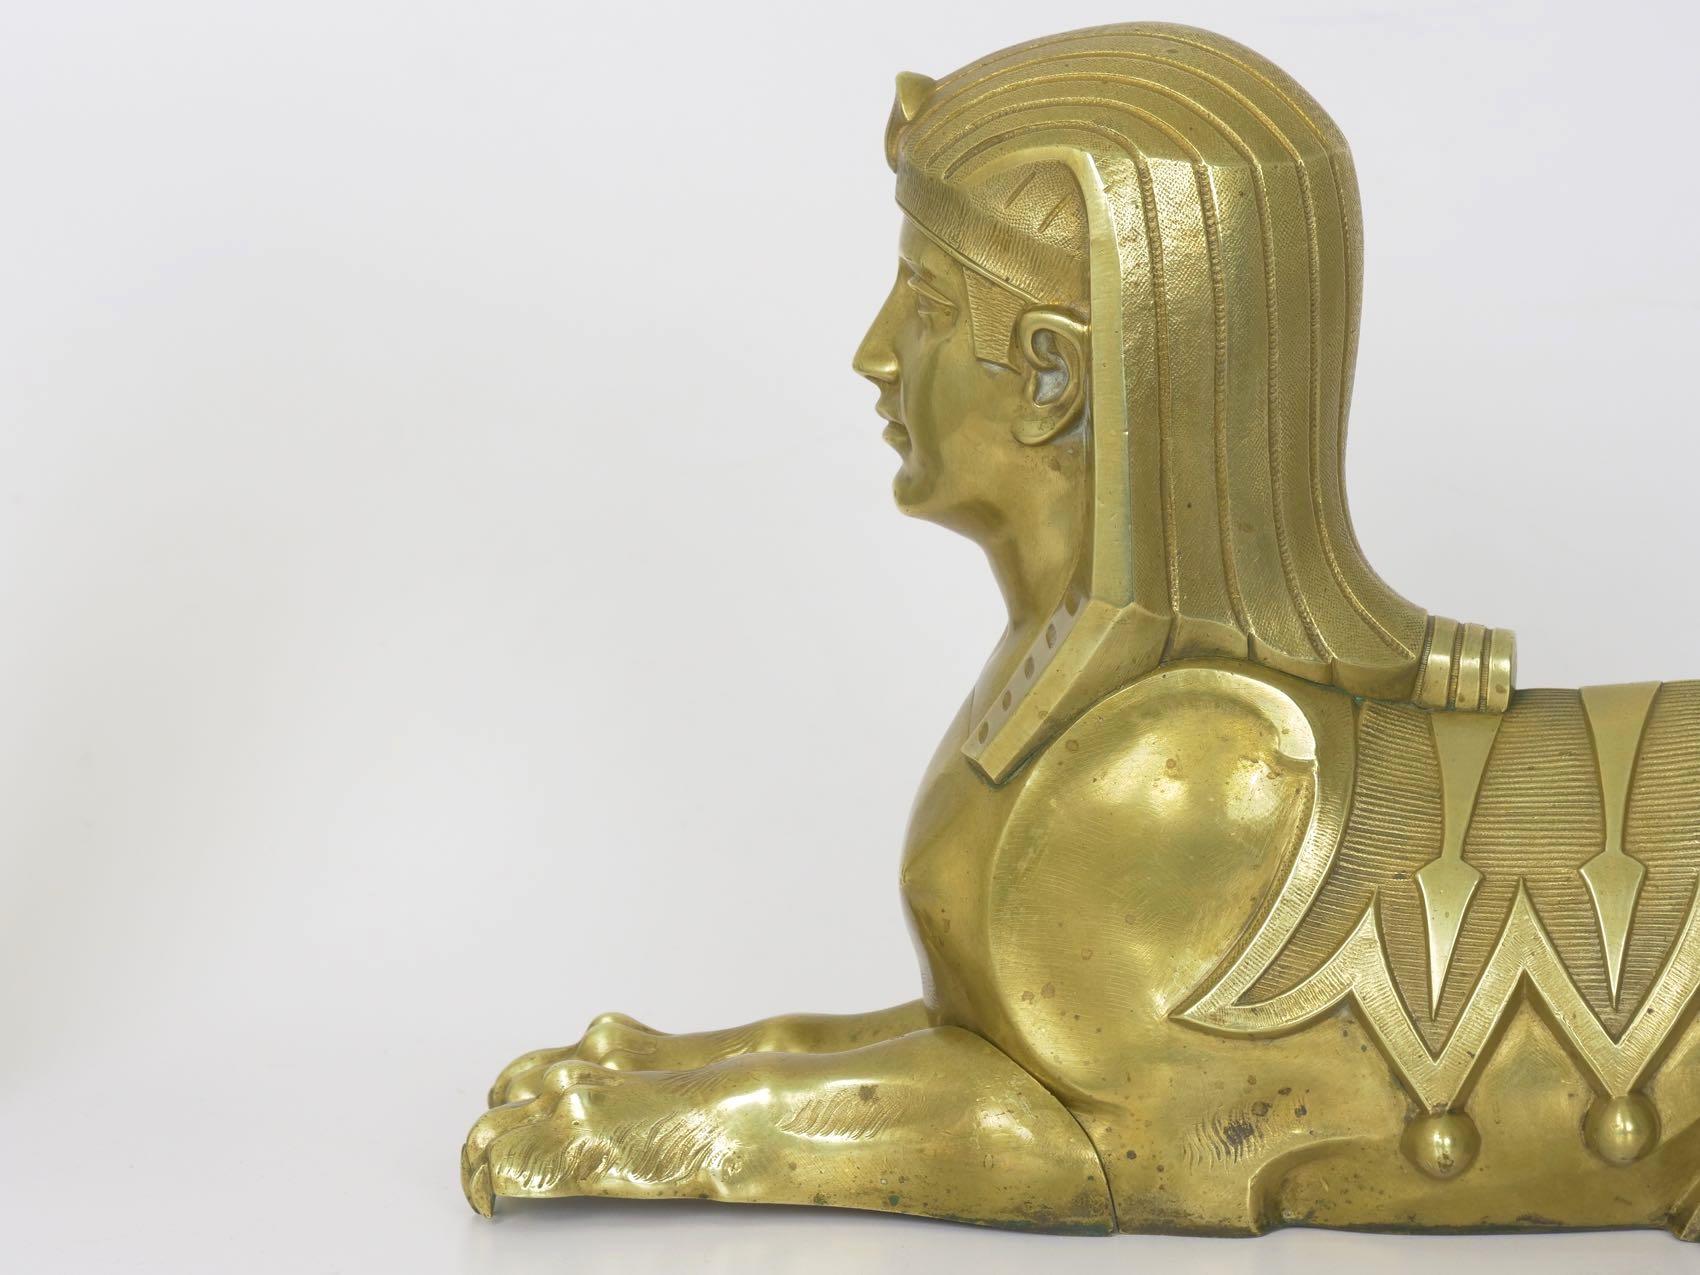 A very finely cast pair of Sphinx figurals in the Egyptian taste, they would originally have been arranged as flanking chenets, likely raised over a rectangular base where the claws would be allowed to overhang the edge slightly; this base would